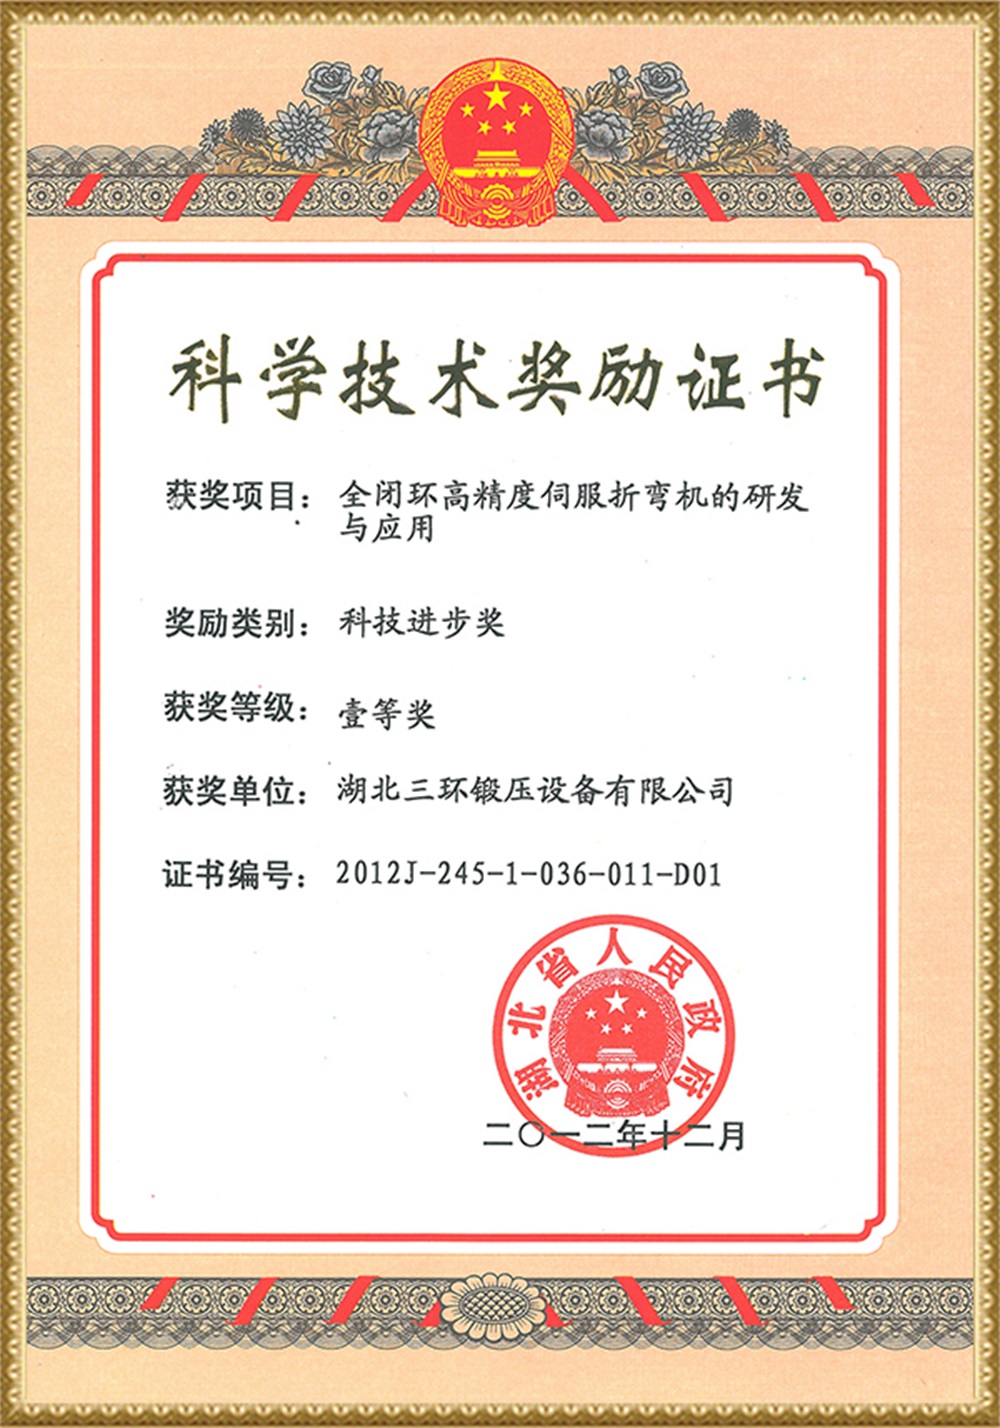 2012 First Prize of Science and Technology Progress Award (Development and Application of Full Closed Loop High Precision Servo Bending Machine)